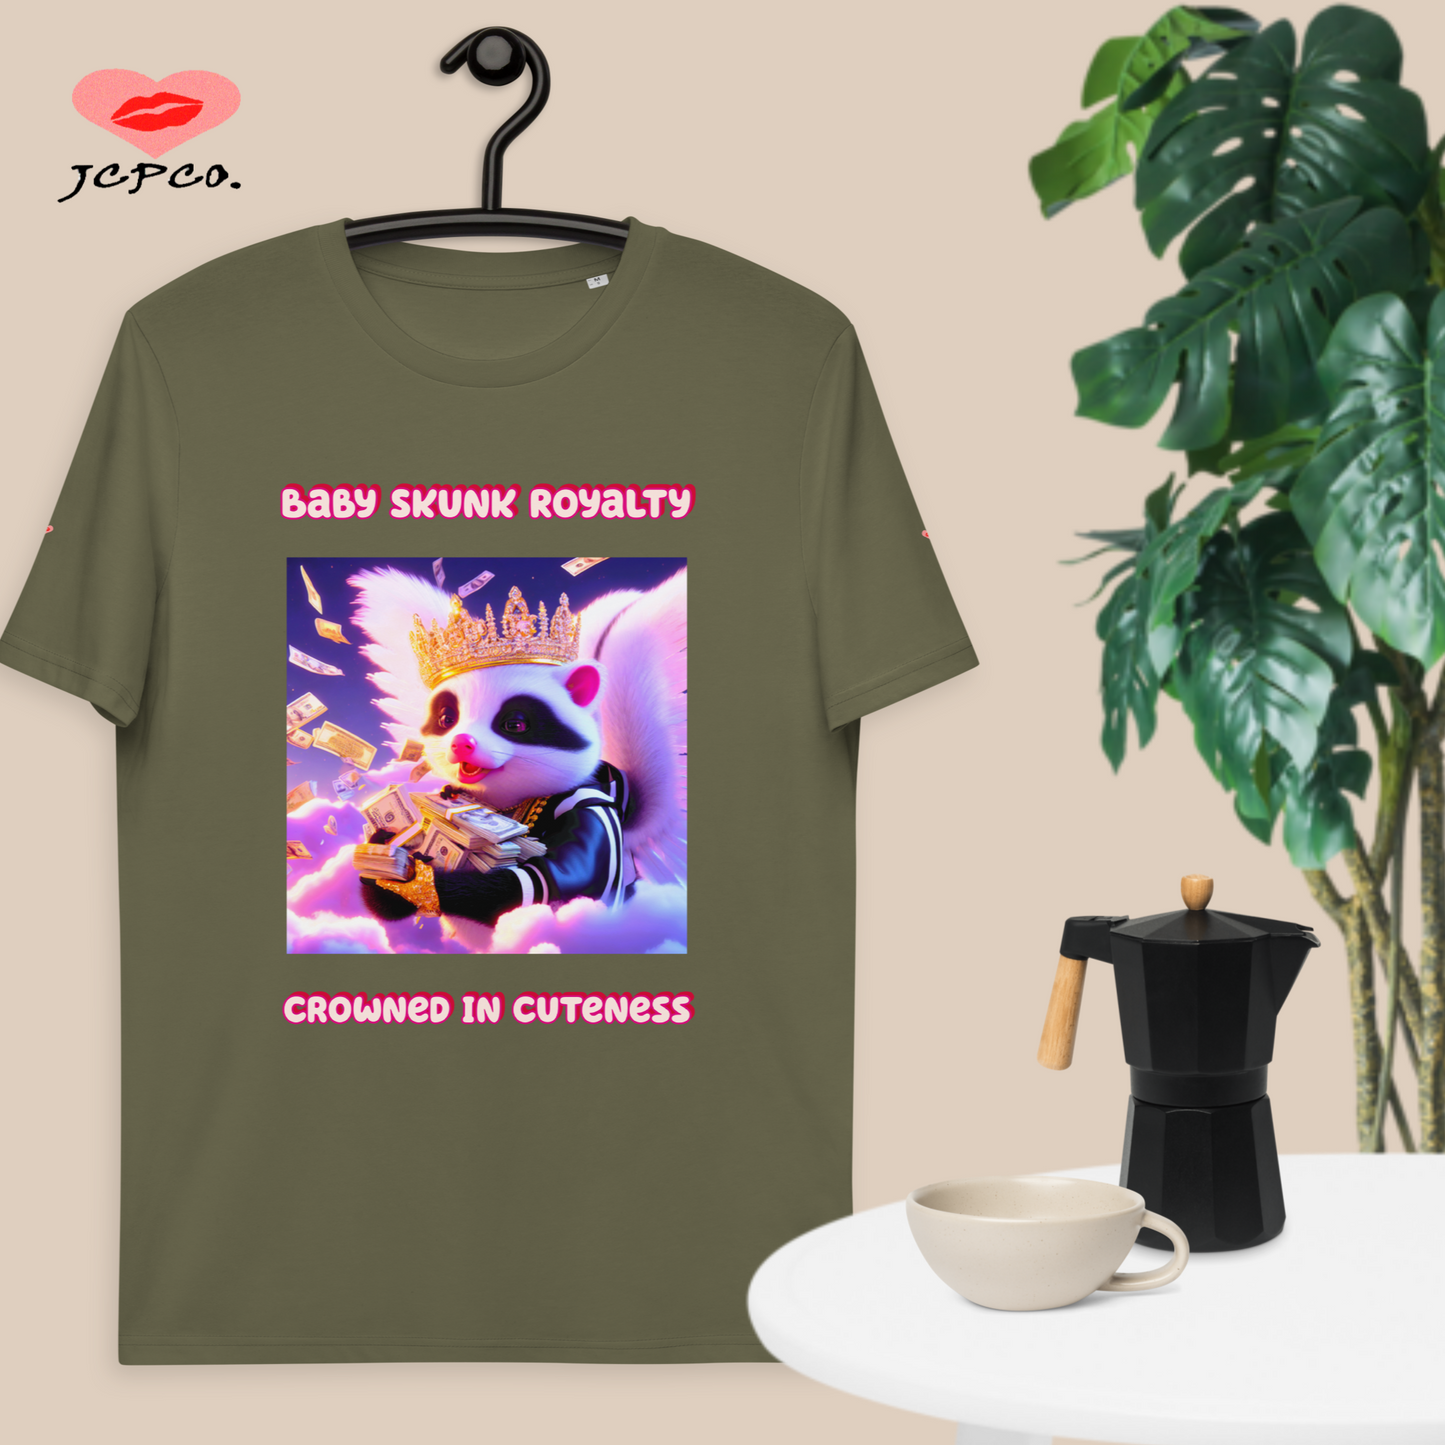 👑🦨Baby Skunk Royalty Skunk Swag Crowned in Cuteness💎Unisex organic cotton t-shirt👕